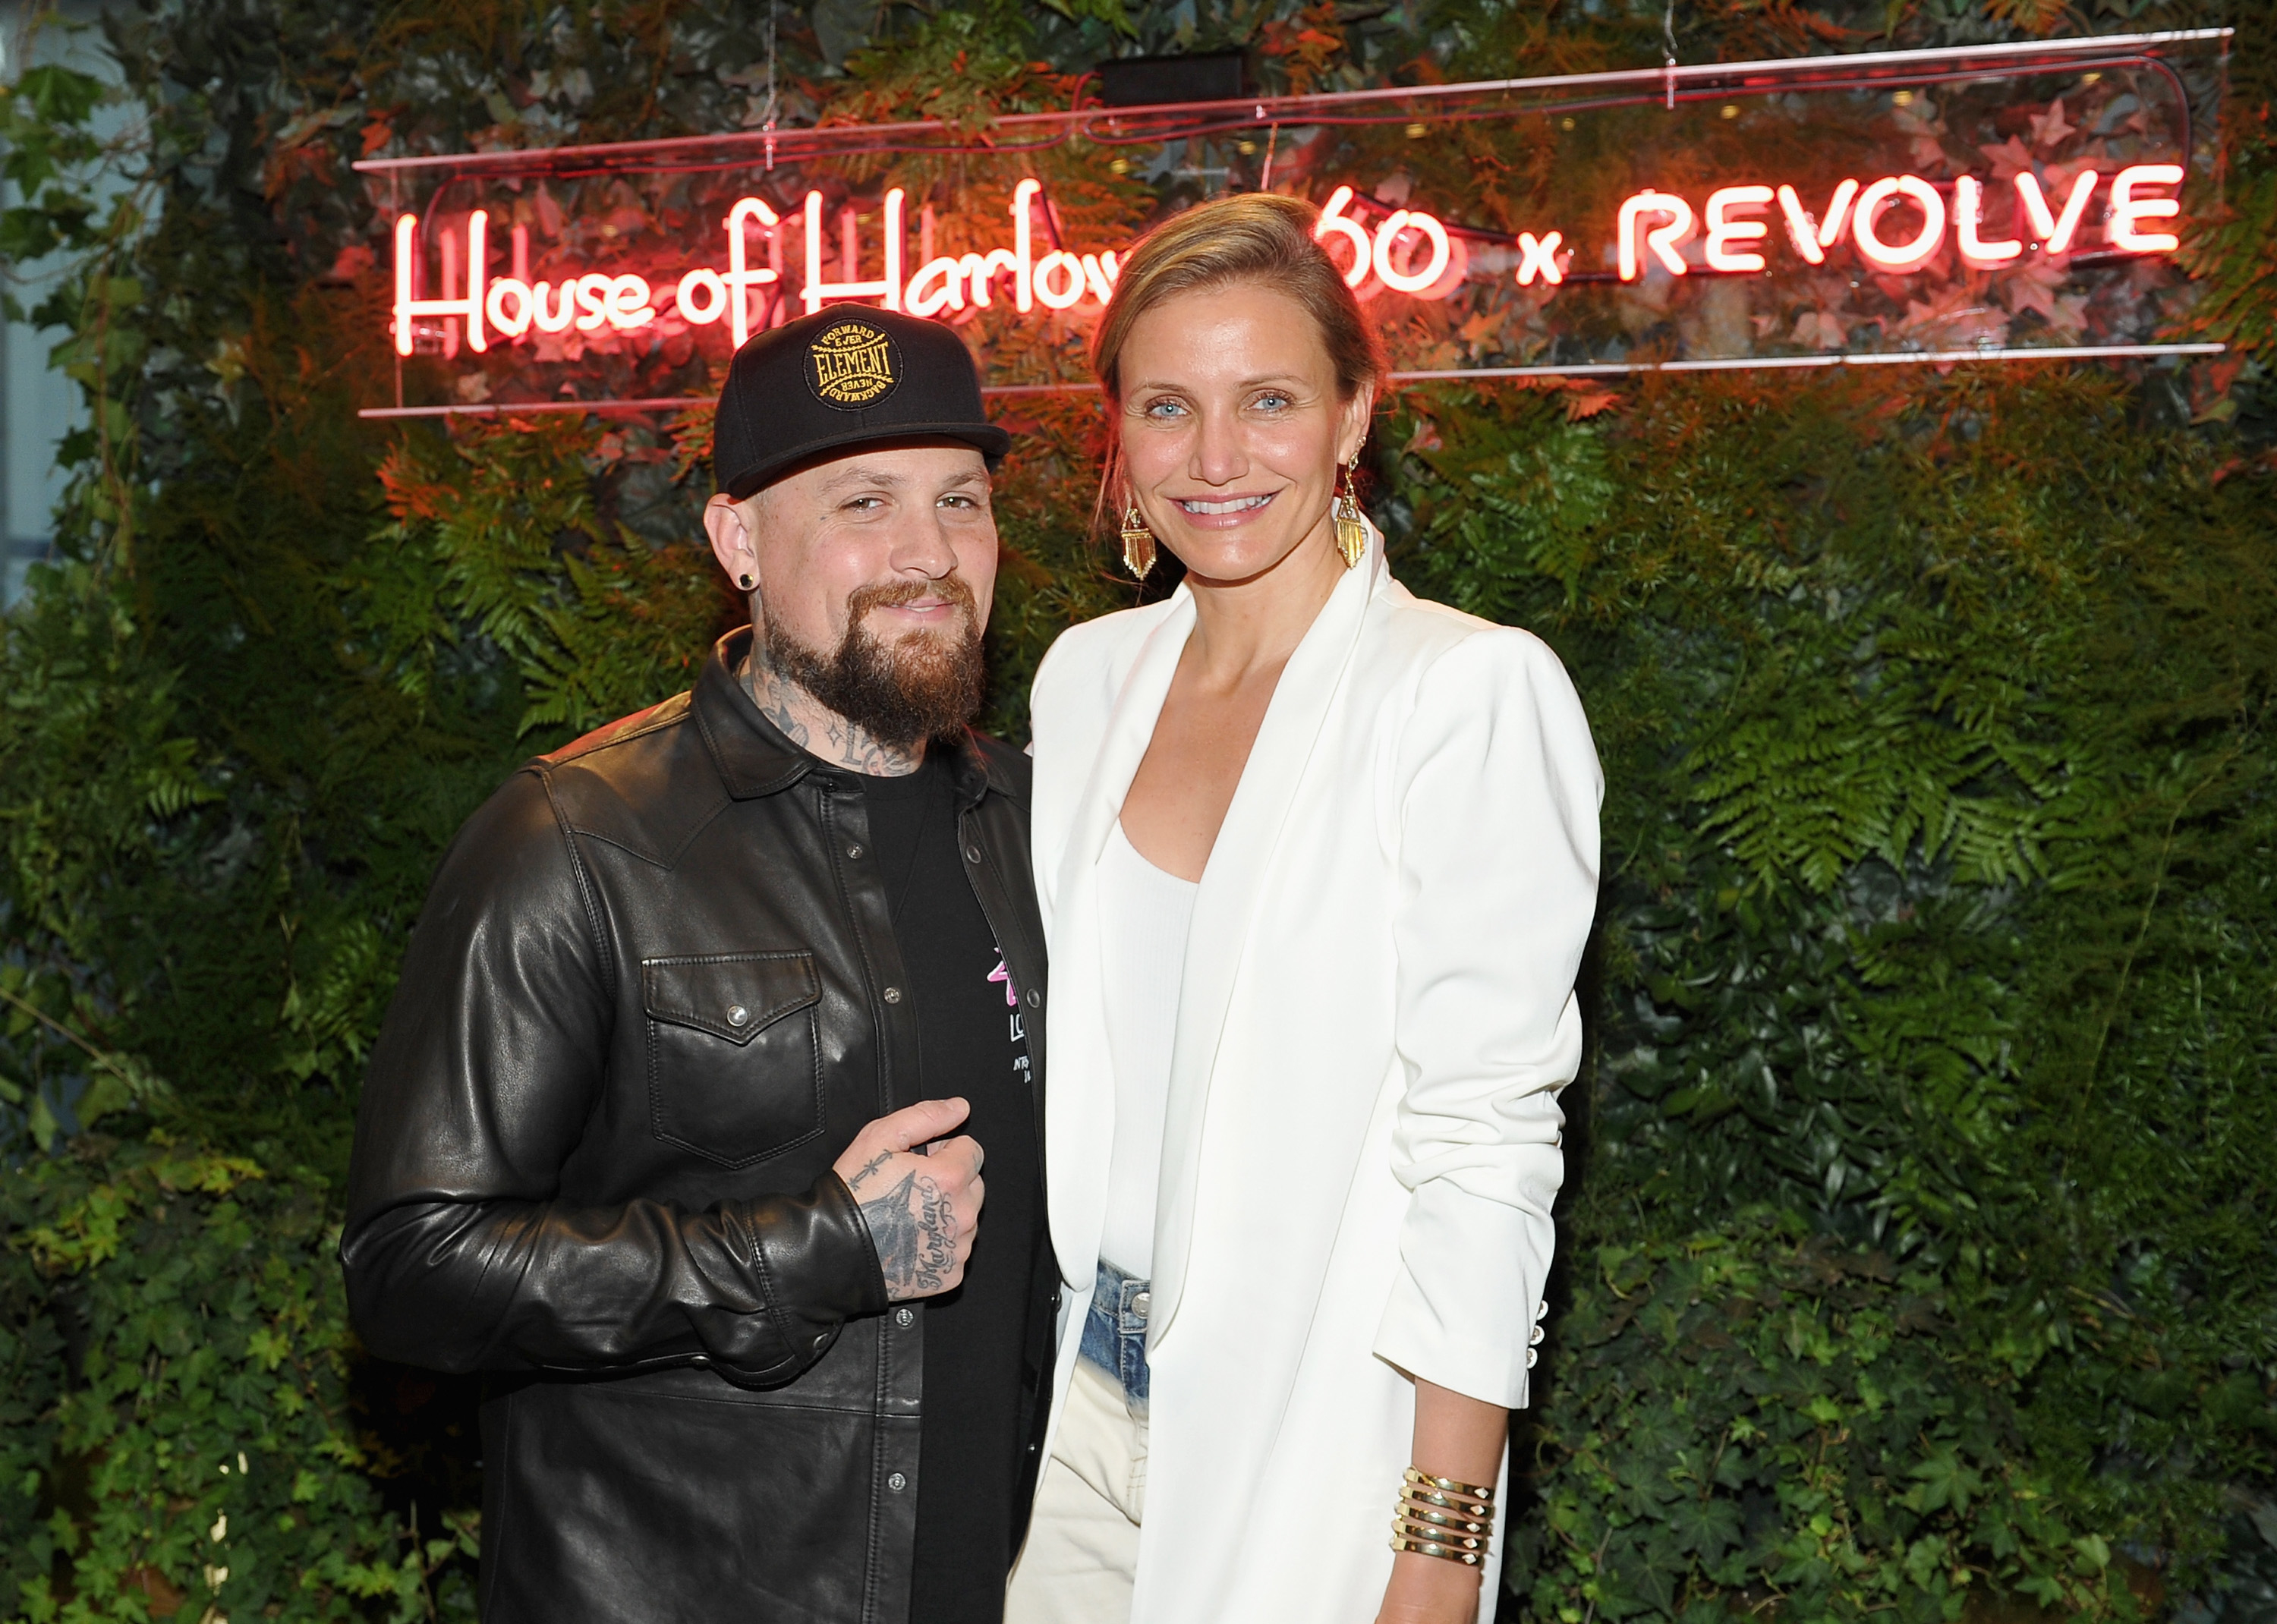 Man in leather jacket and hat with a woman in white blazer at a House of Harlow event